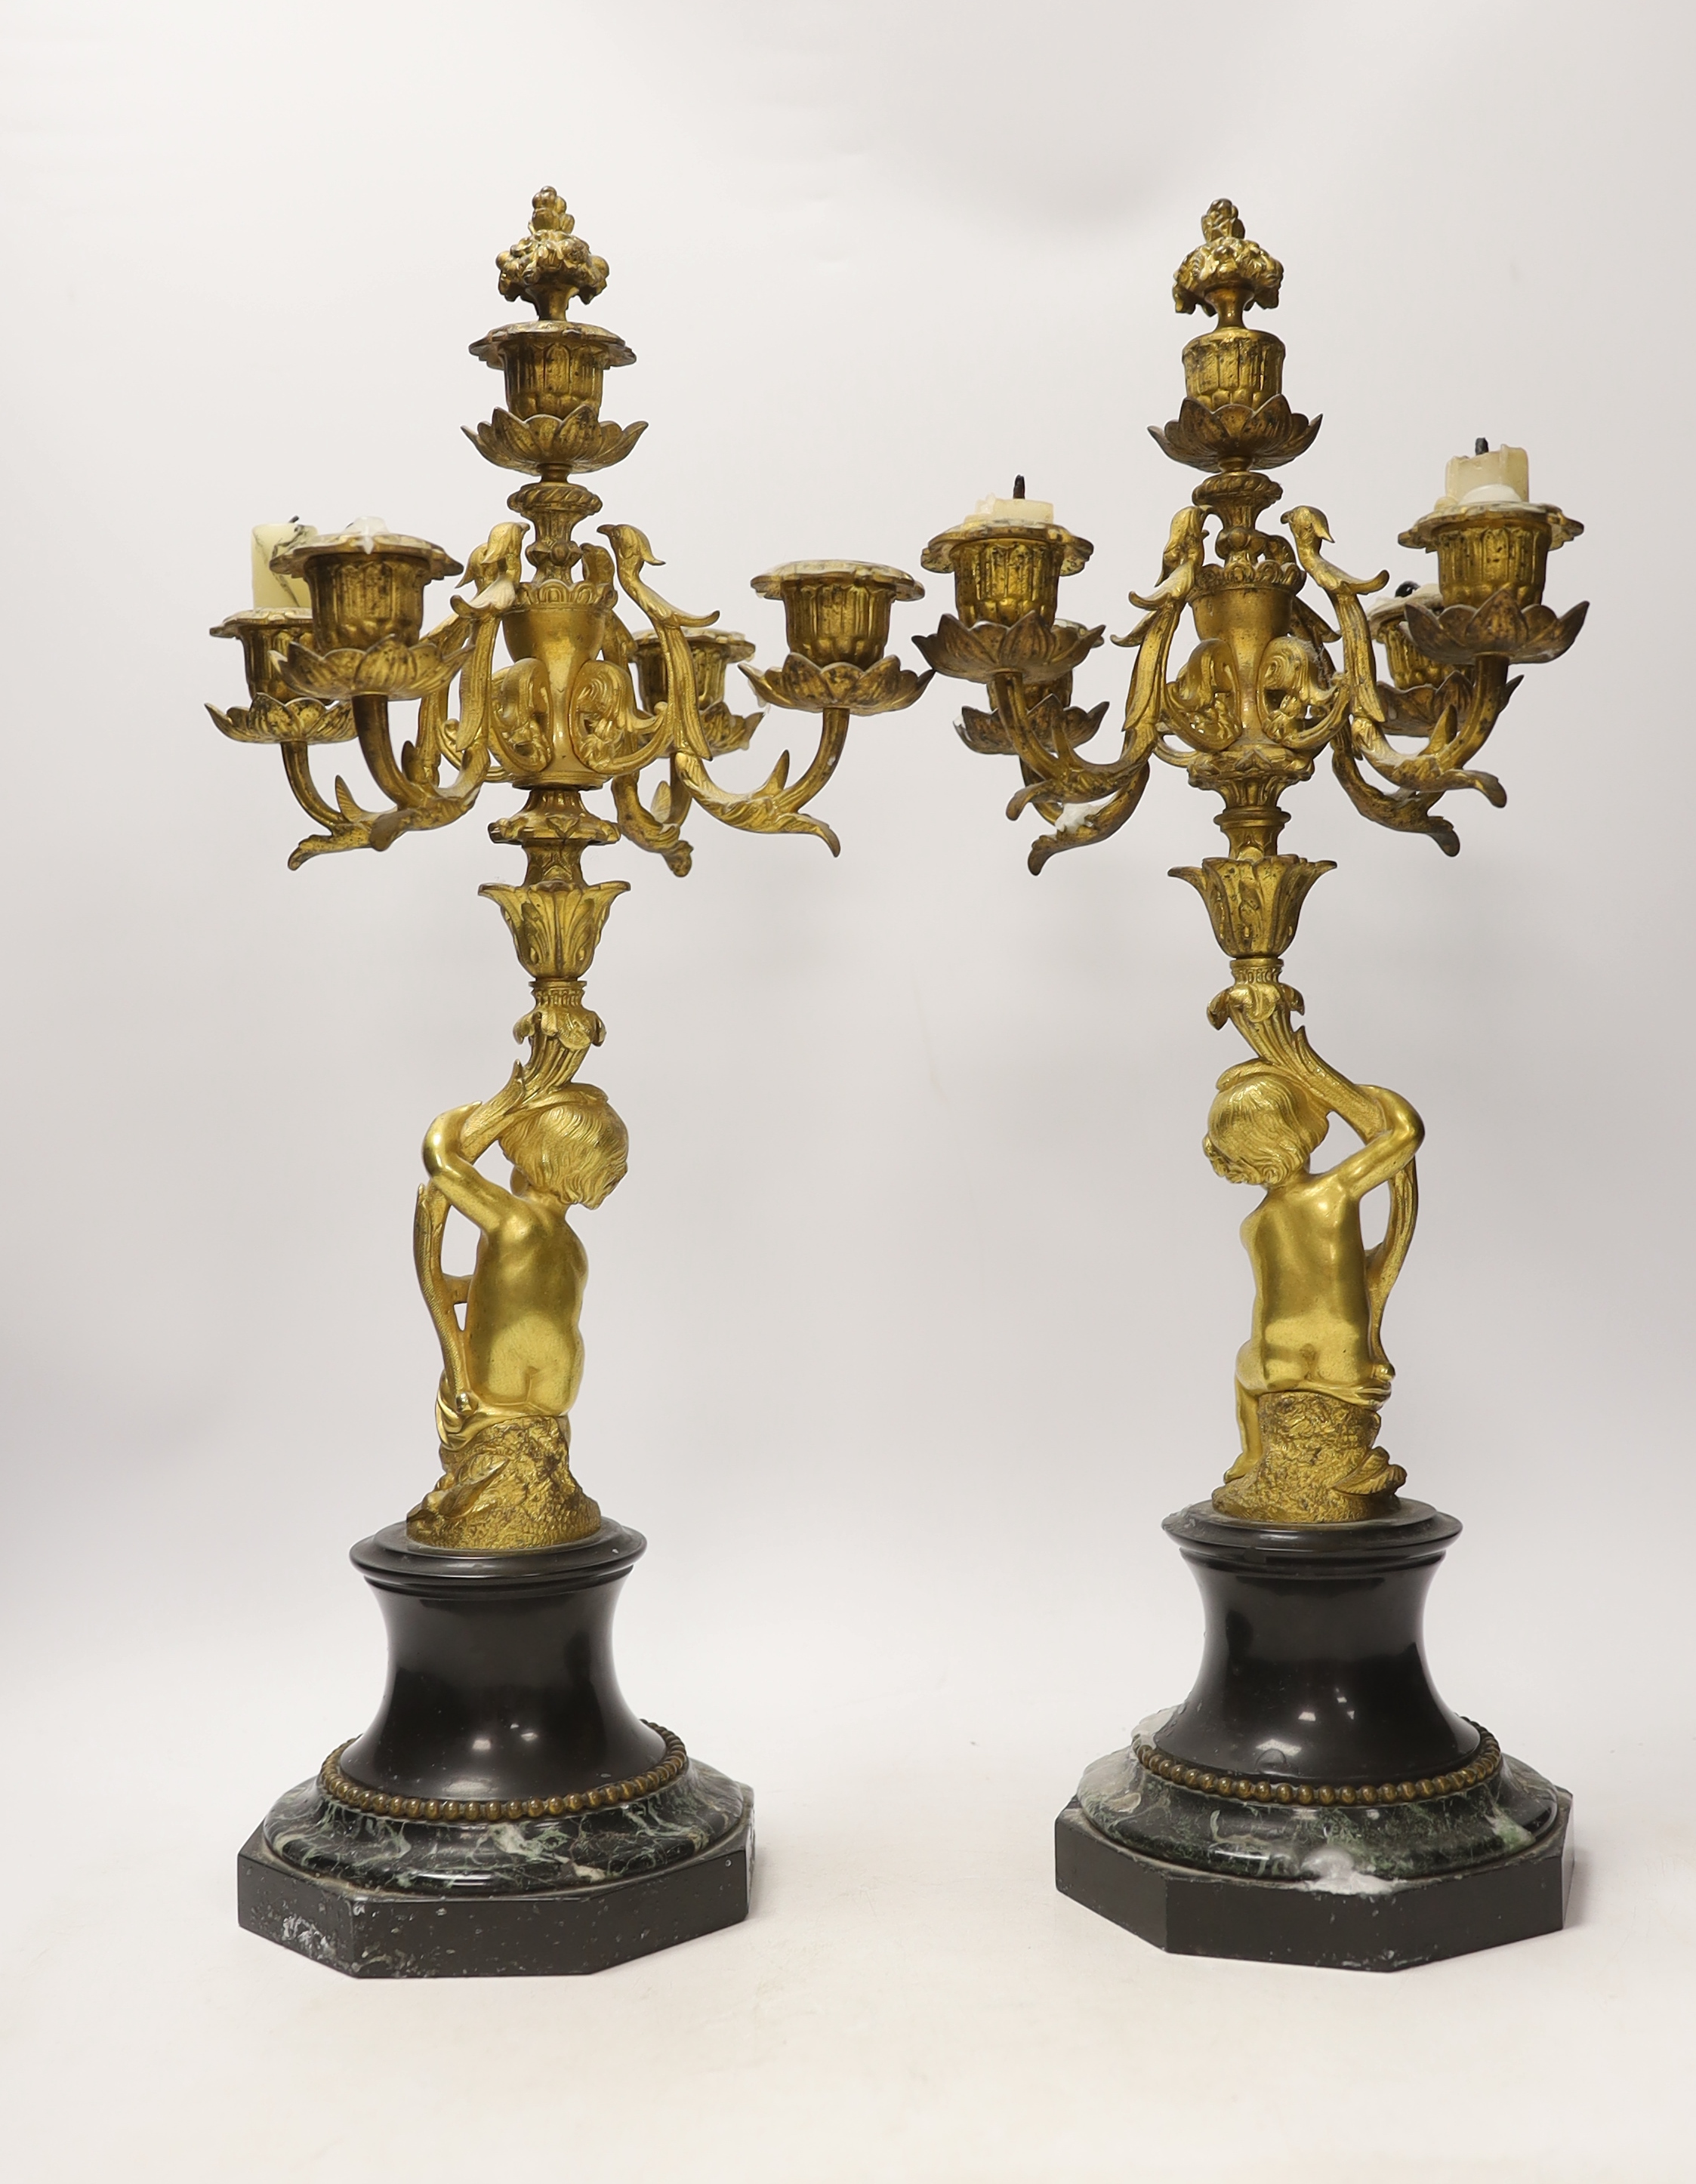 A pair of late 19th century French ormolu cherubic four branch candelabra on marble bases, 47cm